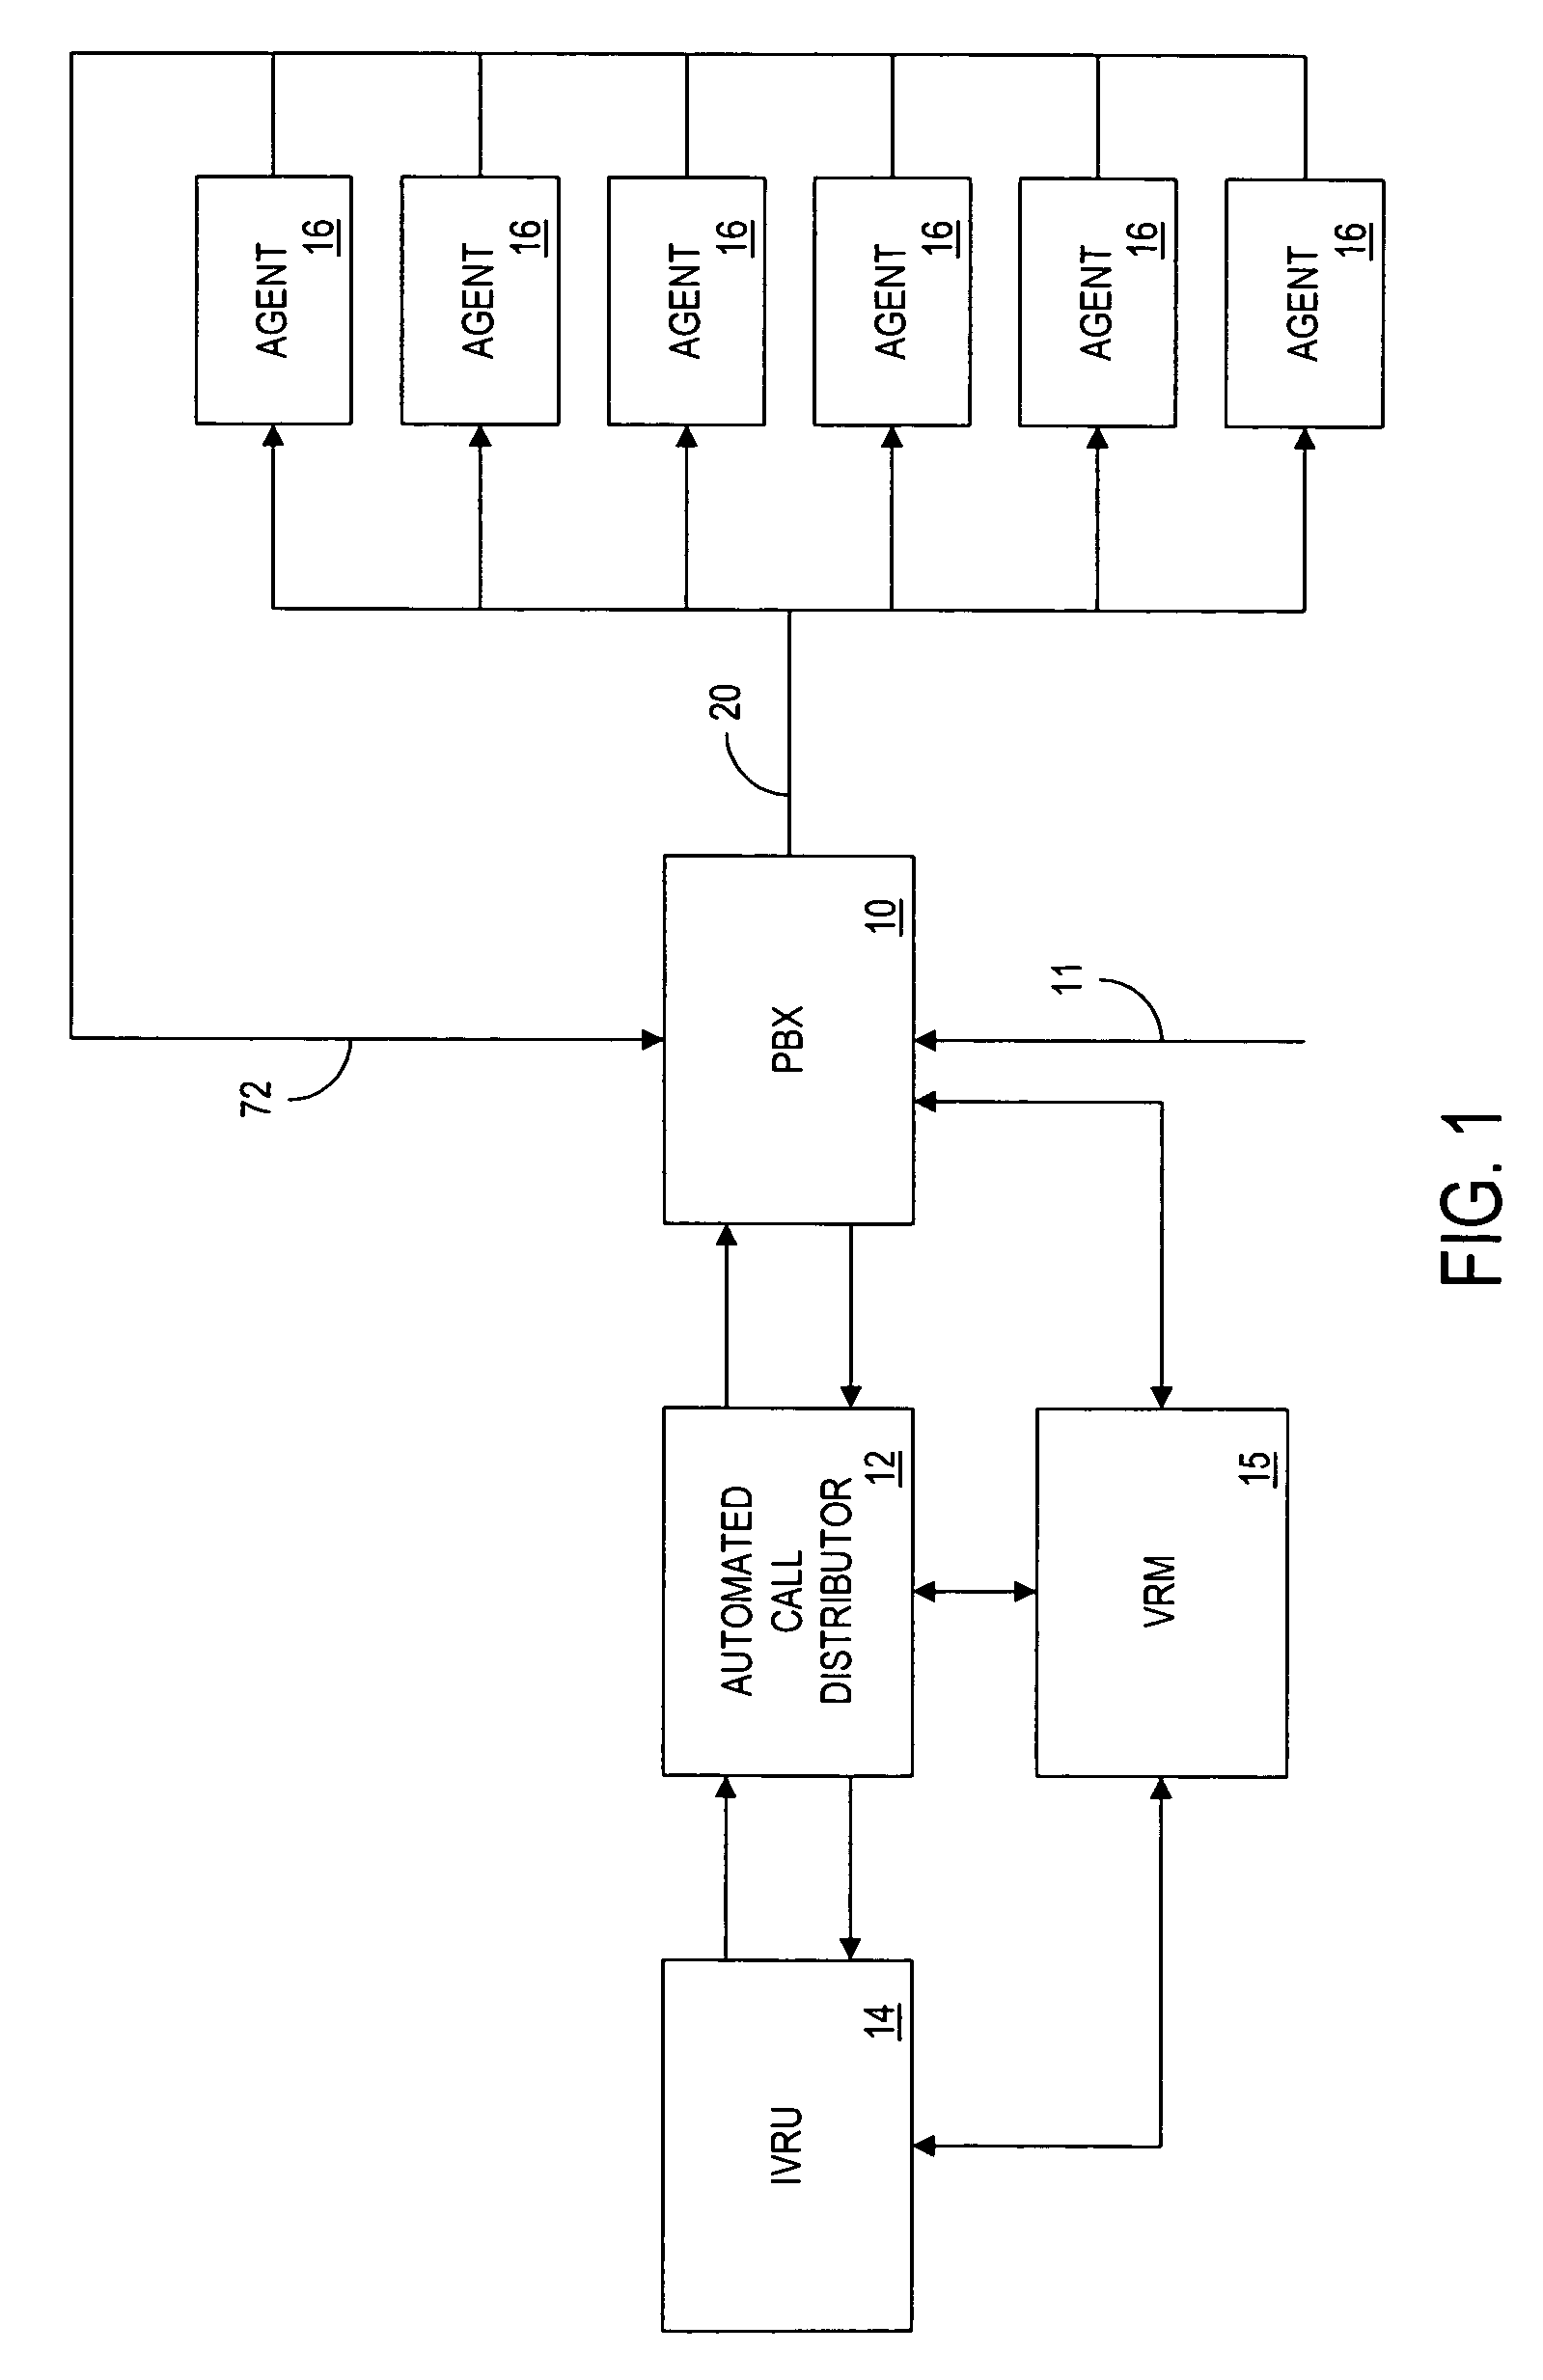 System and method for call routing and enabling interaction between callers with calls positioned in a queue